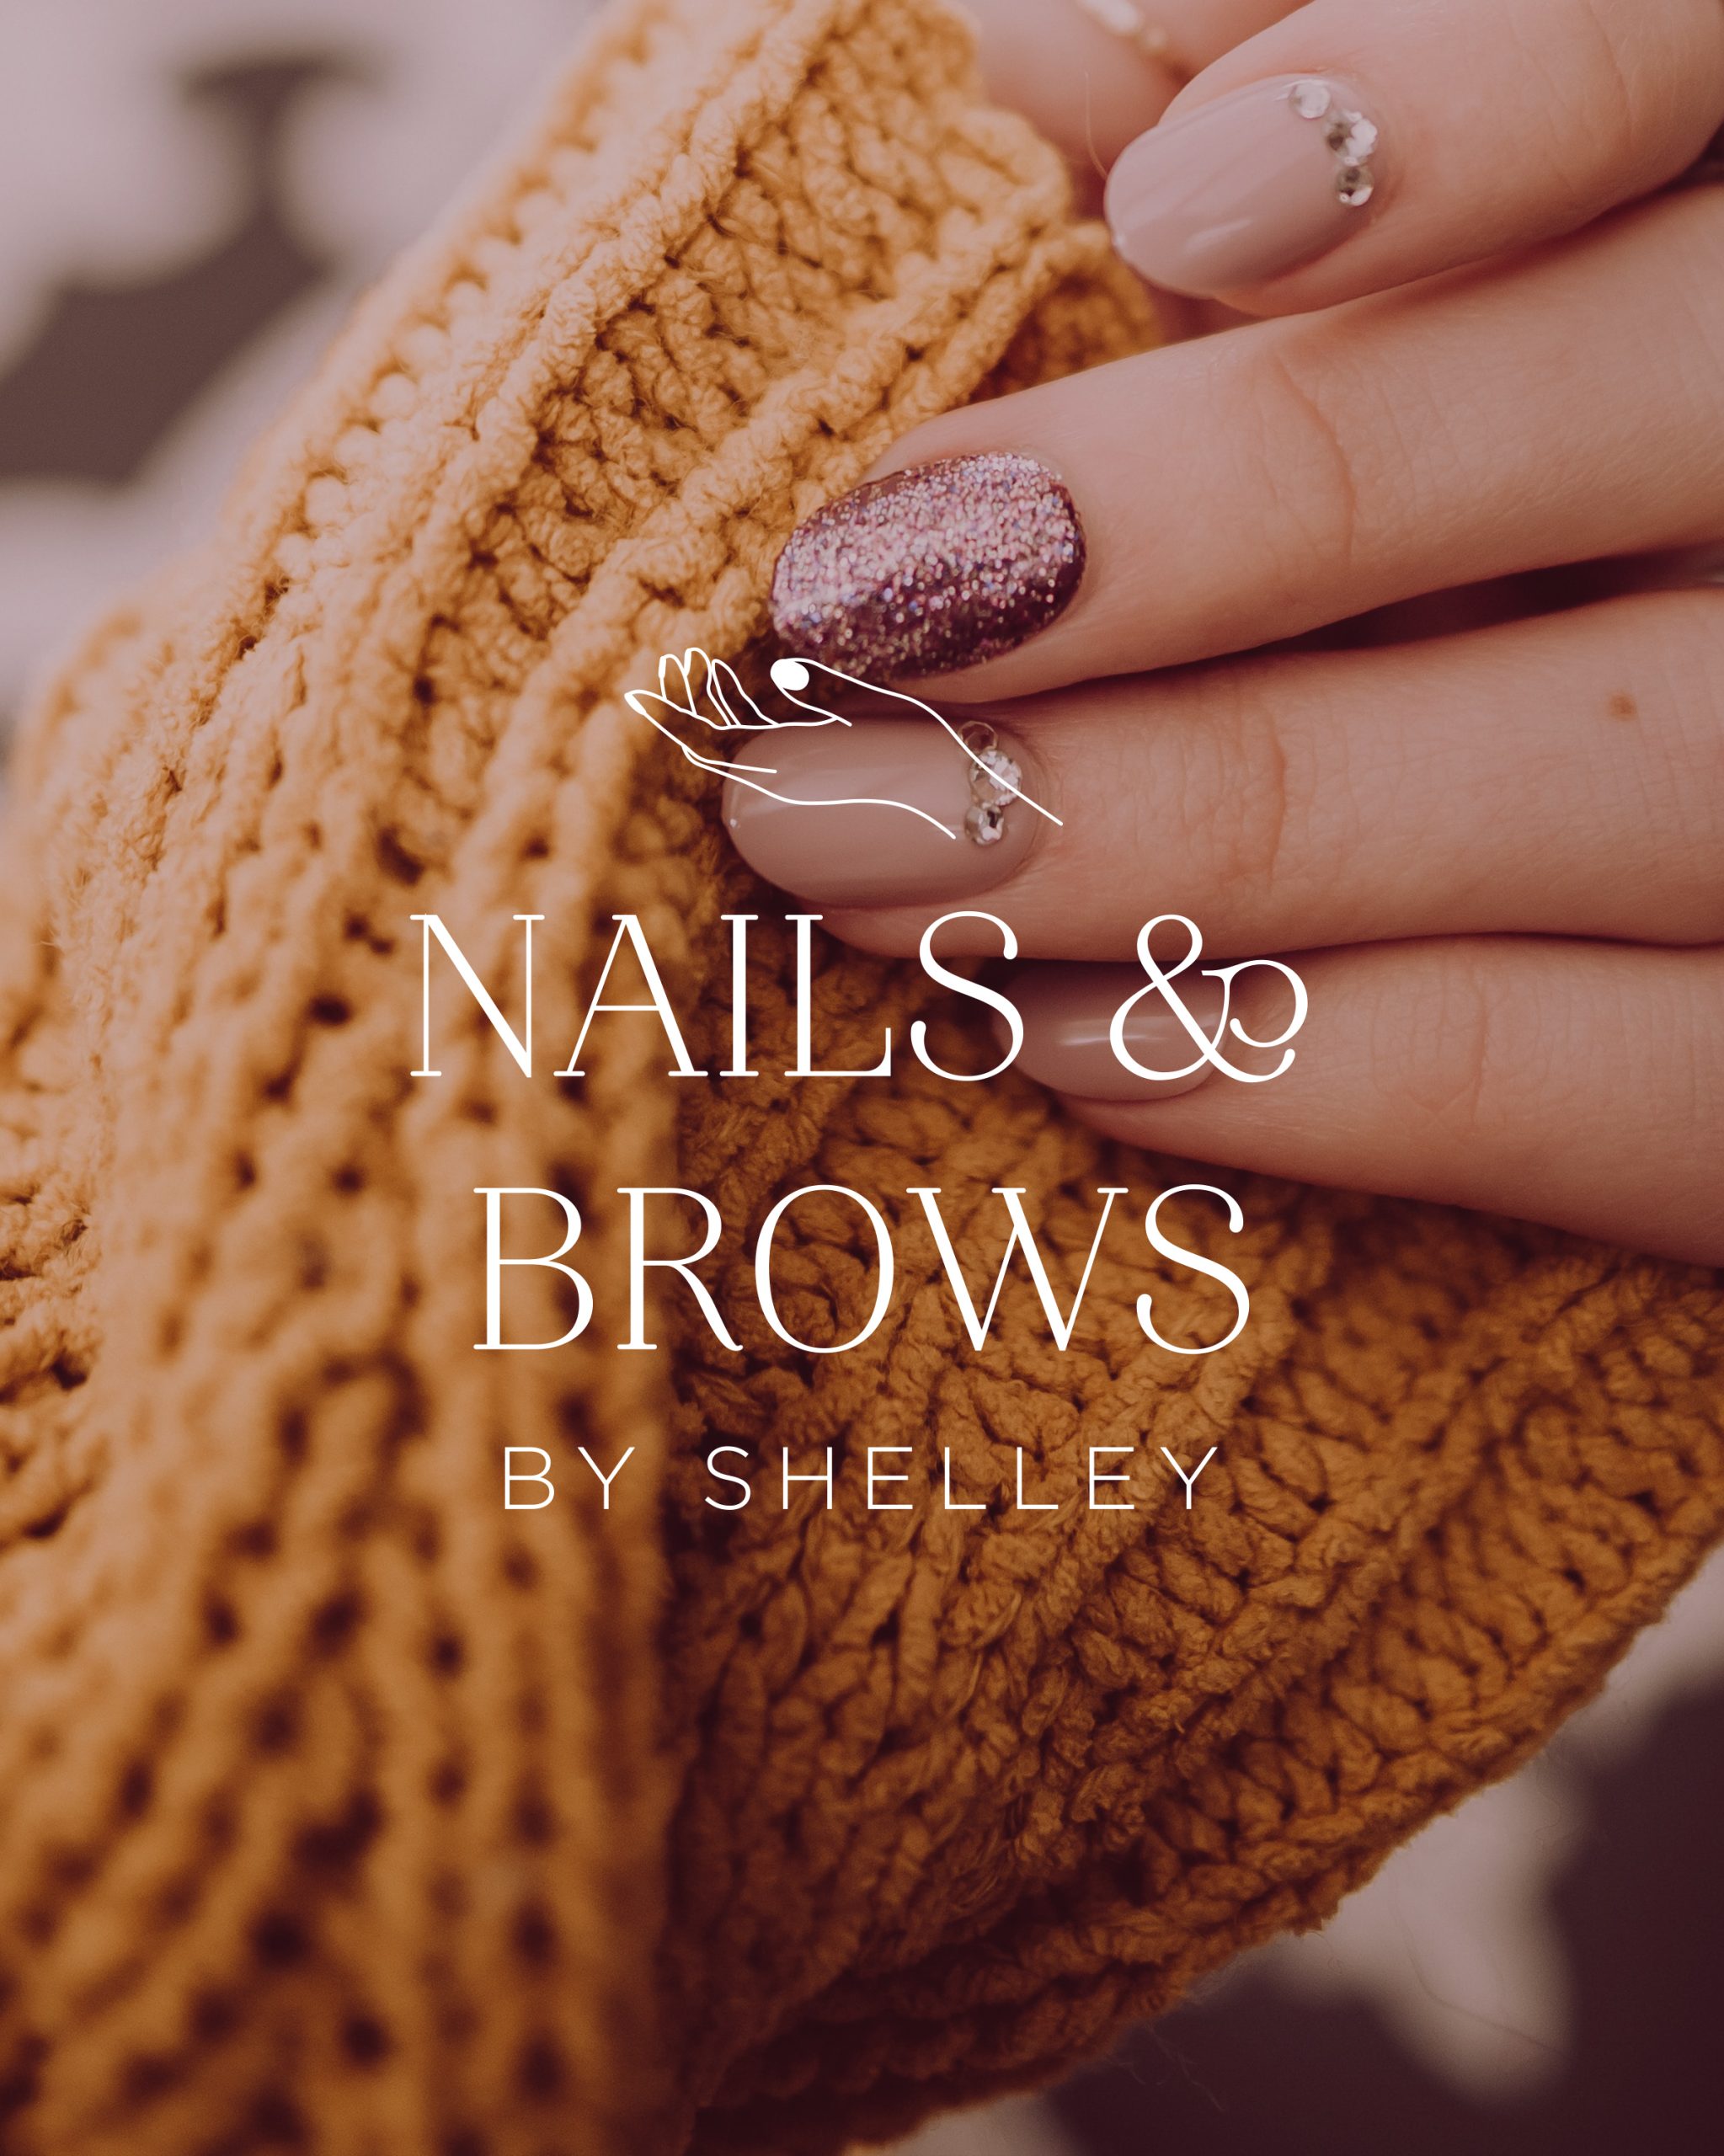 Logo design Nails & Brows by Shelley, Hertfordshire. White stacked logo on photo of nails